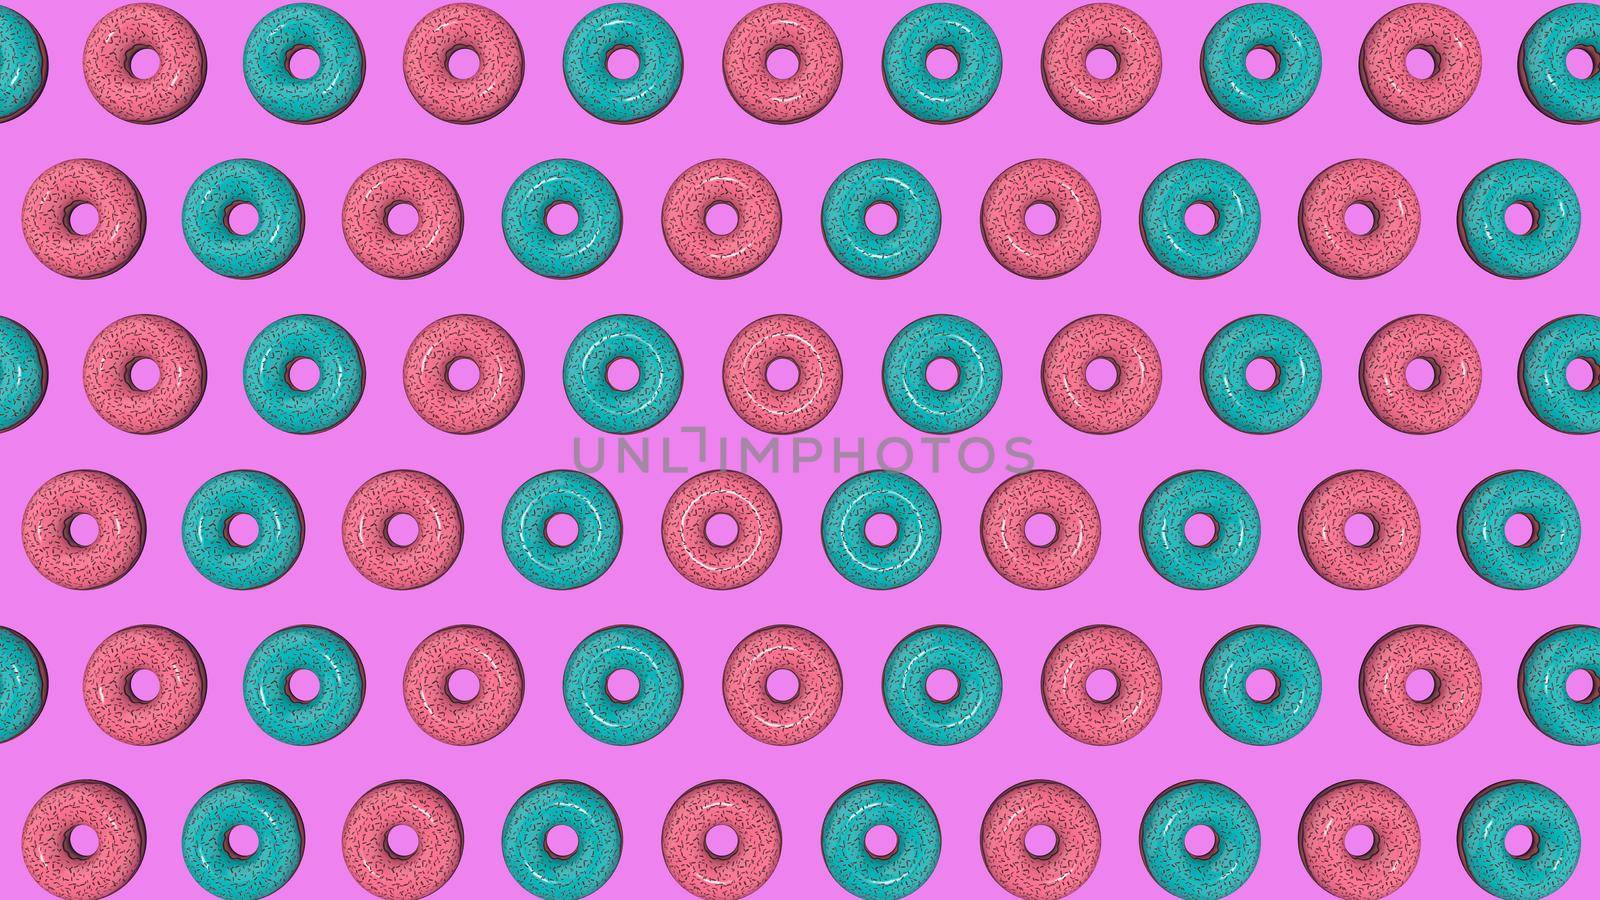 Abstract colorful animation, background of bright donuts. 3D rendering.